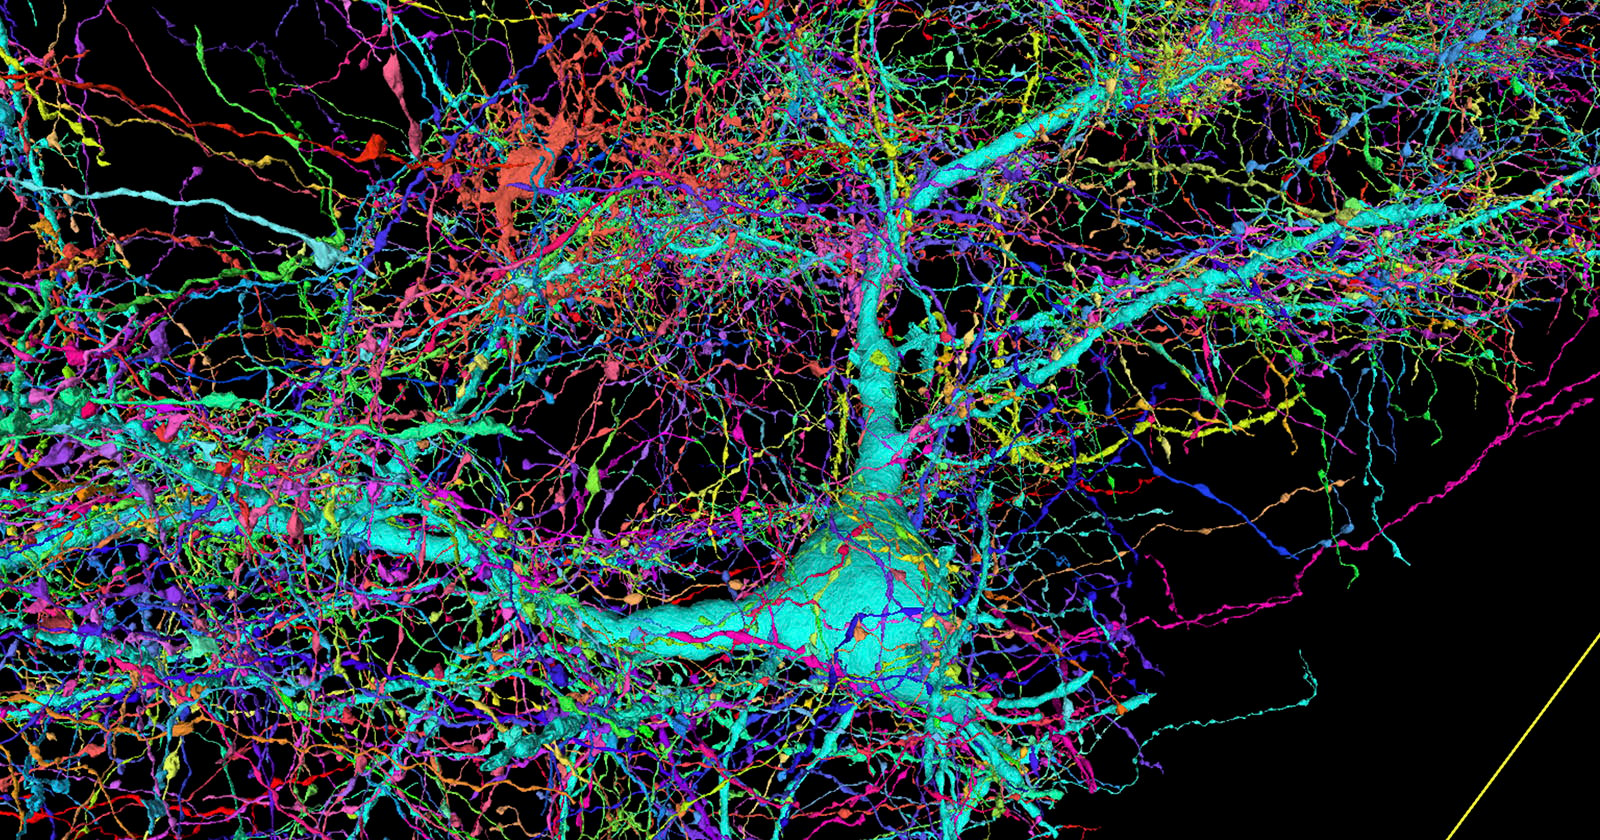 A highly detailed, colorful 3D rendering of neural networks and brain cells, featuring an intricate web of interconnected lines in a diverse palette on a dark background.